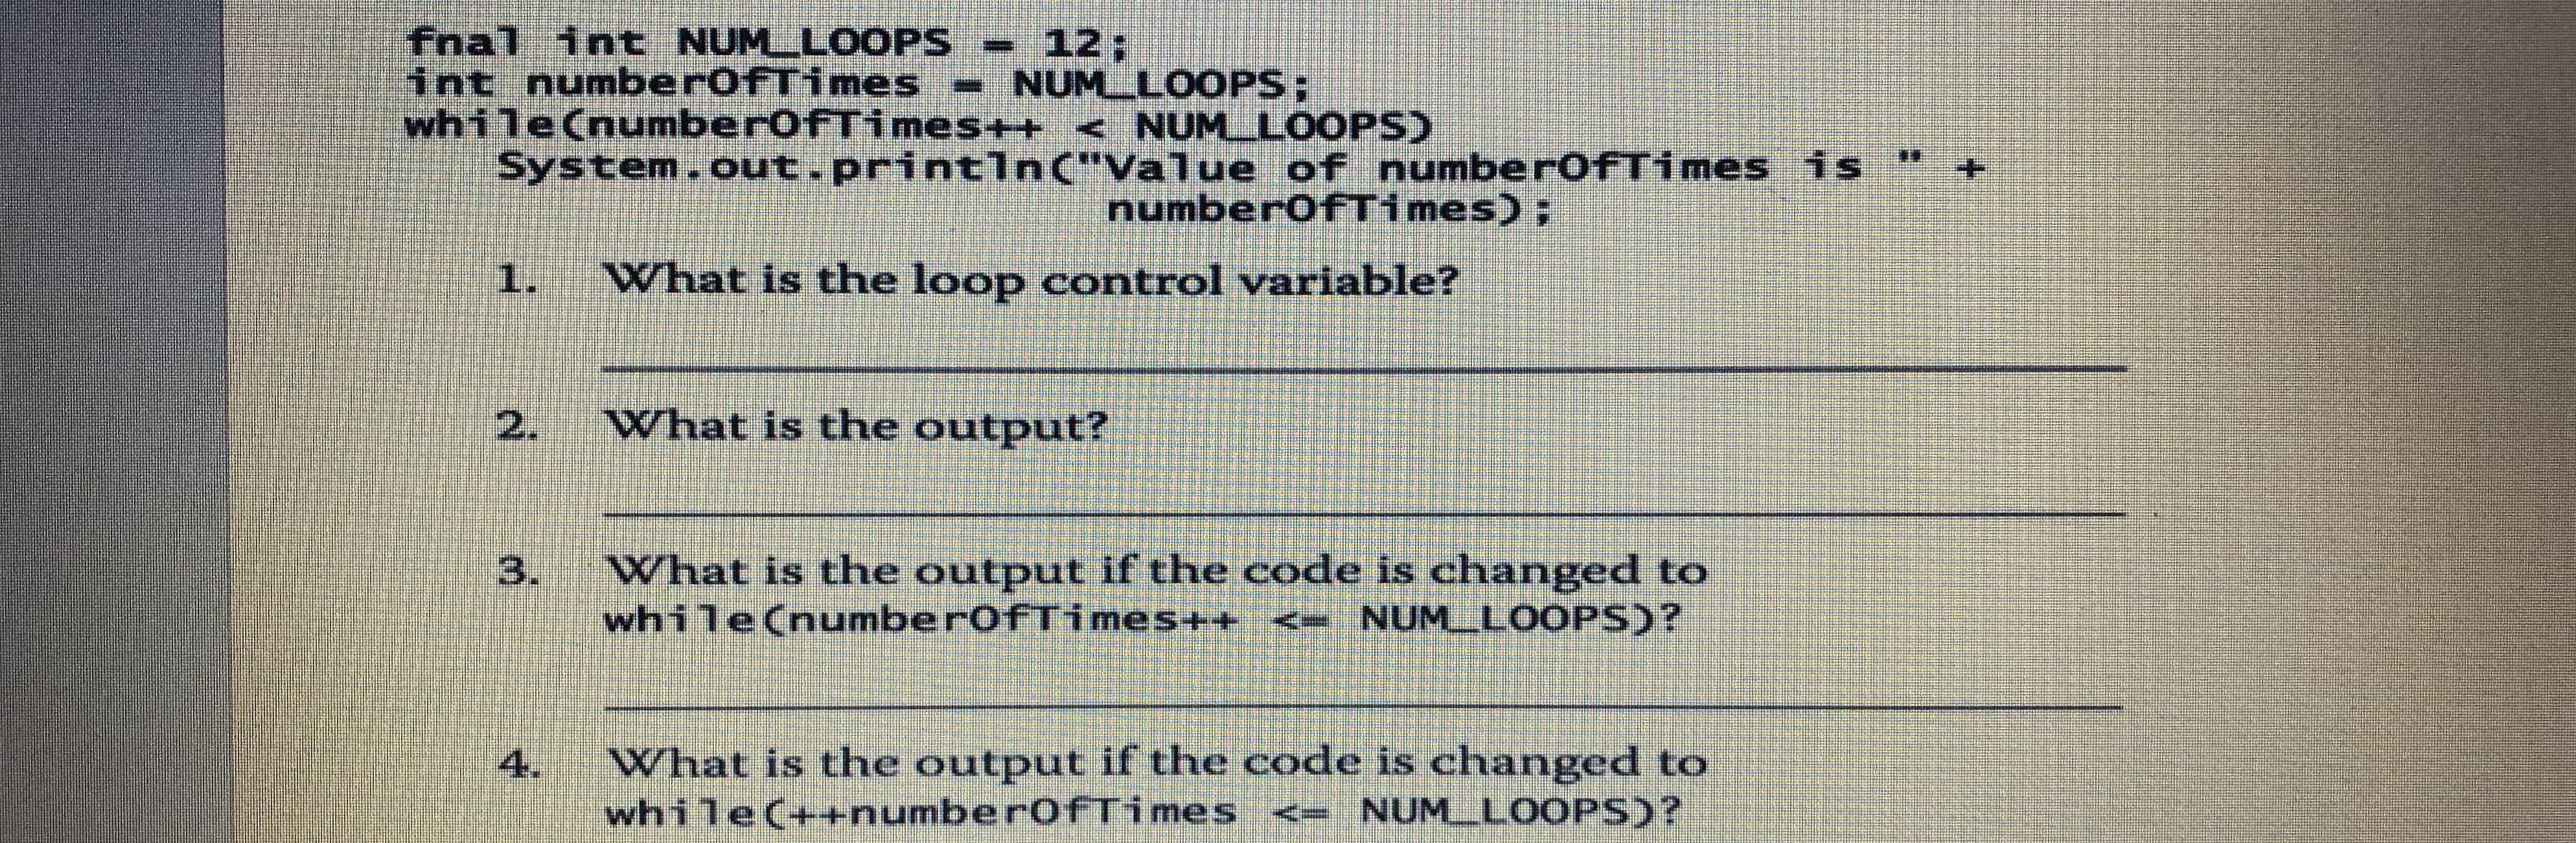 fnal int NUMLLOOPS
int numberofTimes NUMLLOOPS;
while(numberofTimes++ < NUM LOOPS)
System.out.println("Value of numberofTimes is
12;
*.
numberofTimes);
1.
What is the loop control variable?
What is the output?
3.
What is the output if the code is changed to
while(numberofTimes++ <- NUM_LOOPS)?
4.
What is the output if the code is changed to
while(++numberofTimes <= NUM_LOOPS)?
2.
